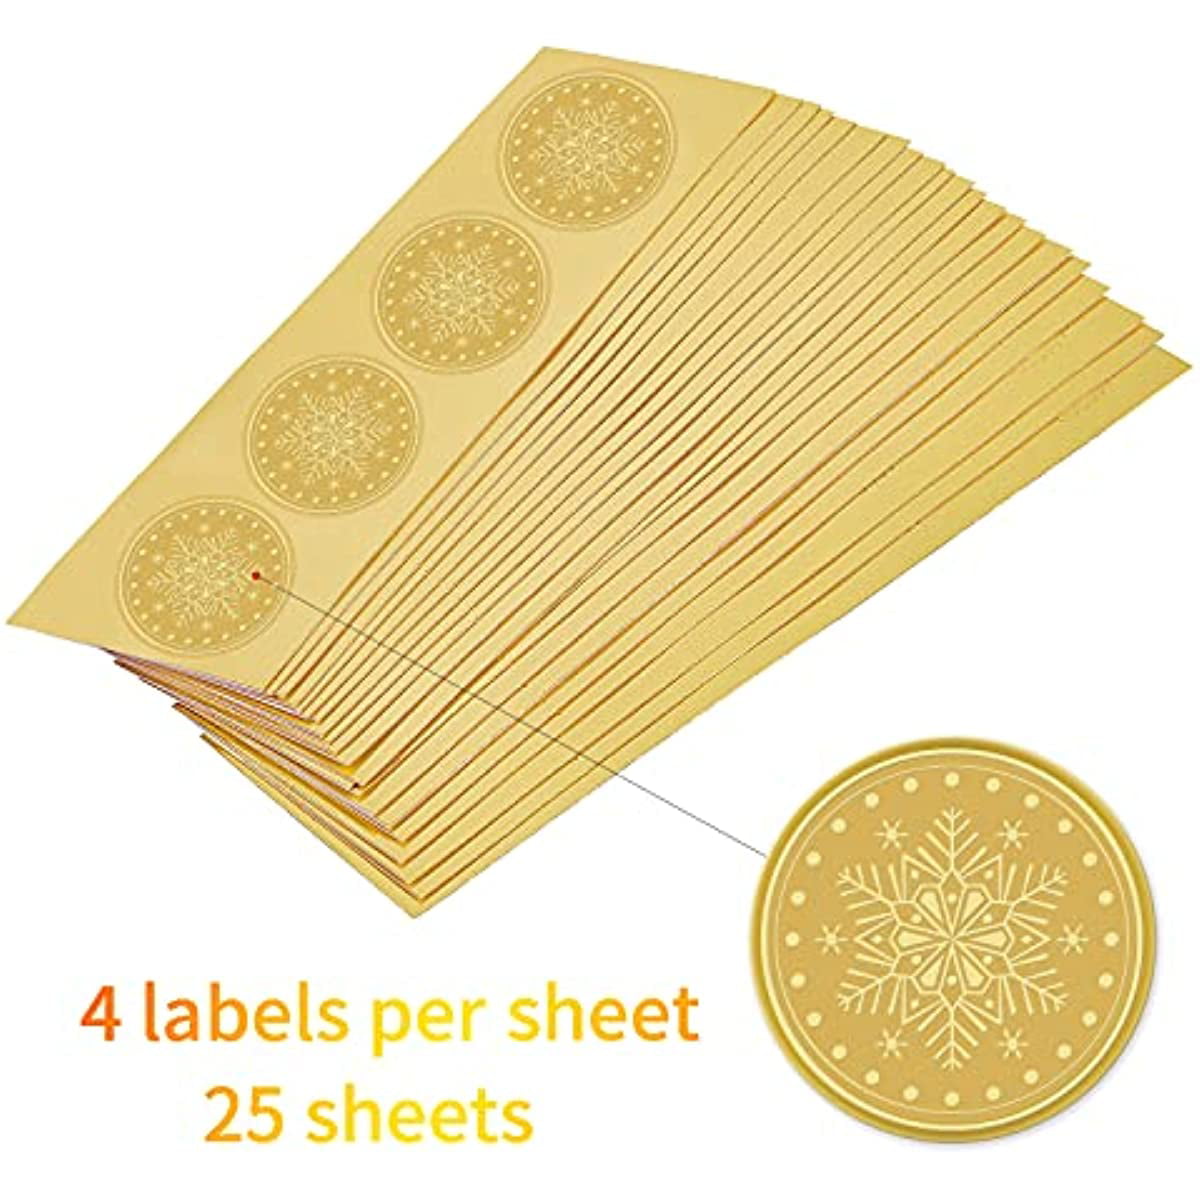 50 pcs Foil Seal Stickers/ Wedding Stickers/Gold, Silver, Red Envelope  Seals/ Embosser seal Stickers